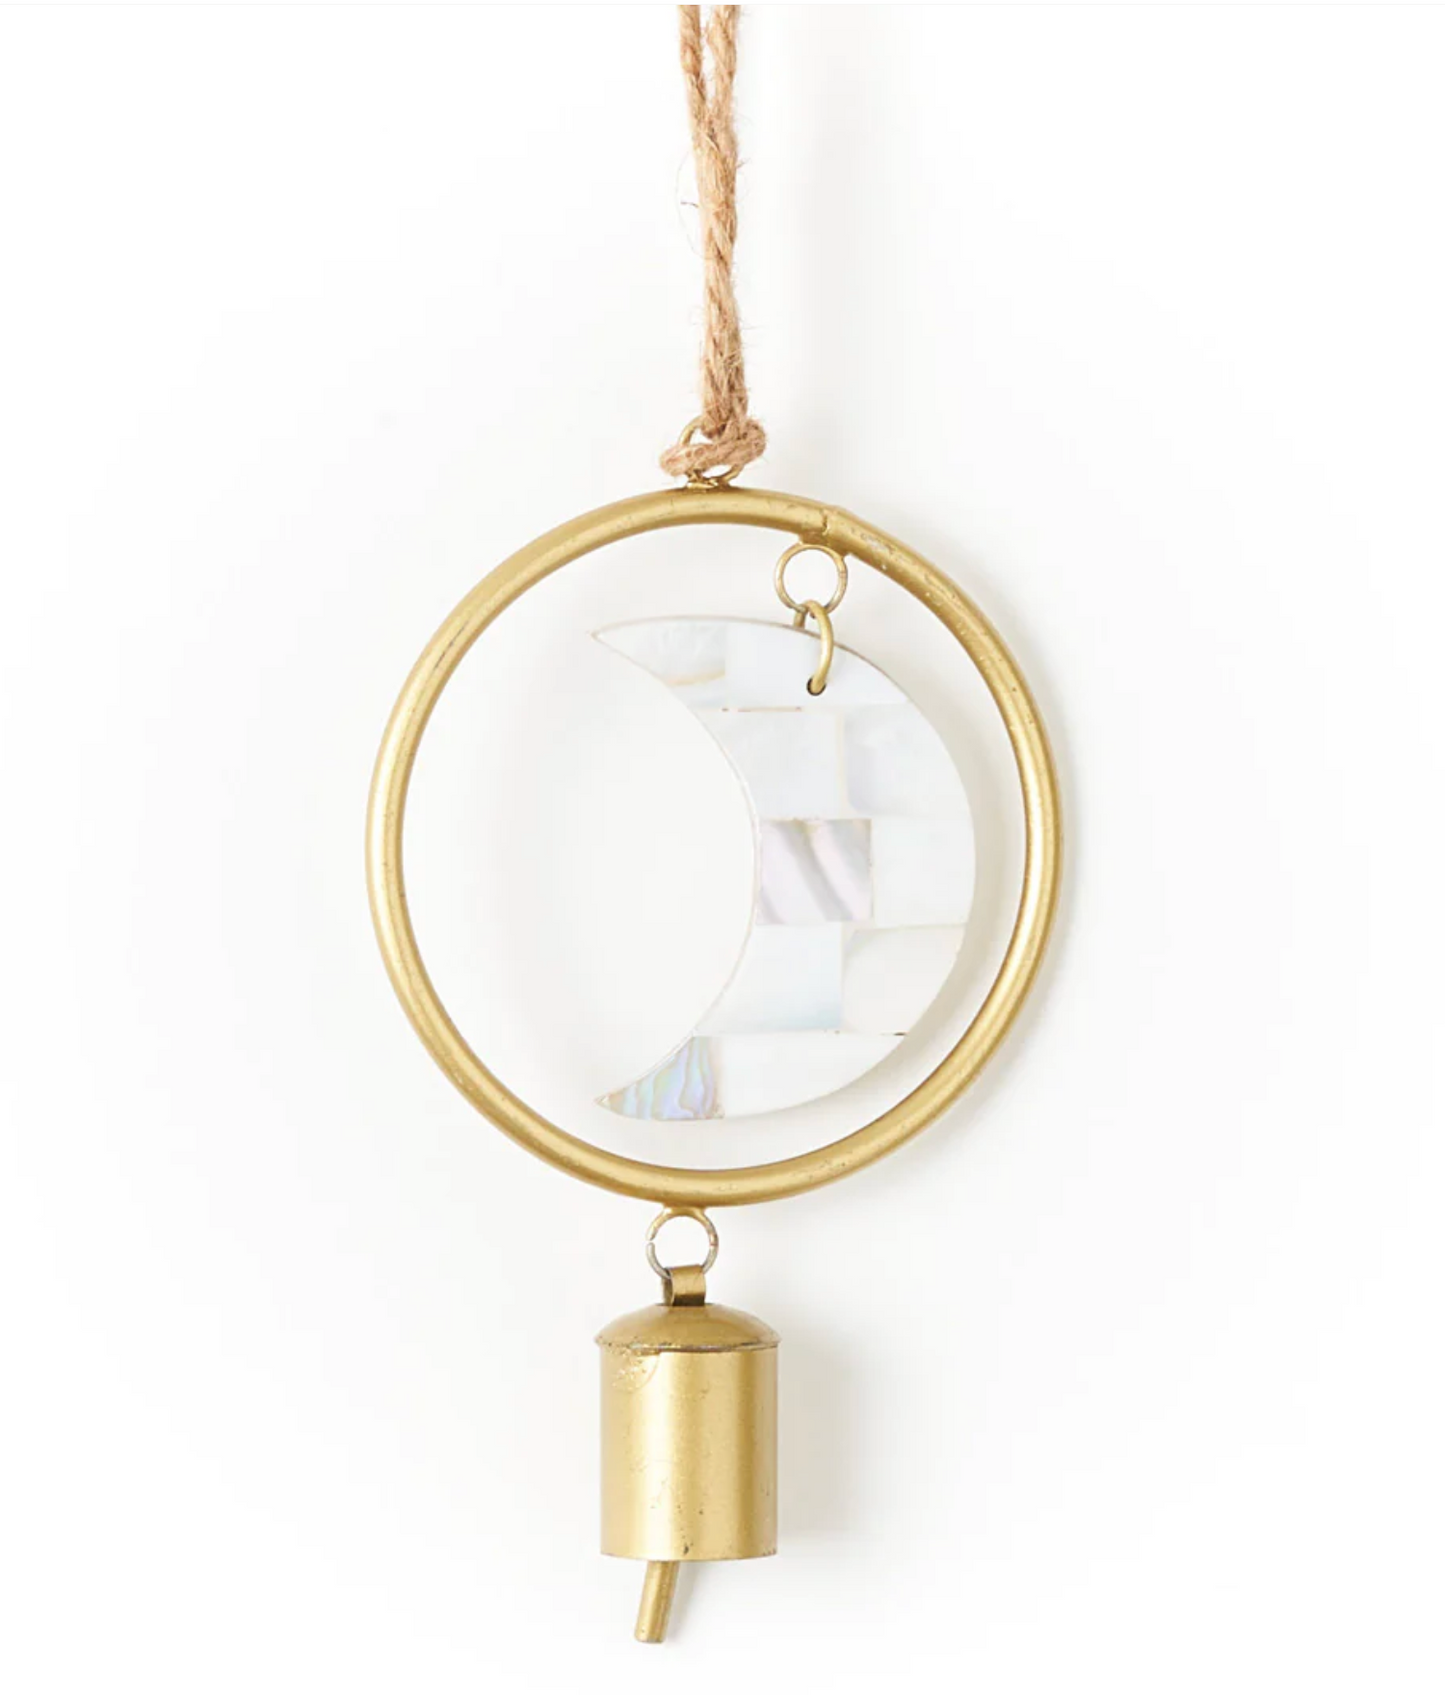 Chayana Crescent Moon Mother of Pearl Chime - Small